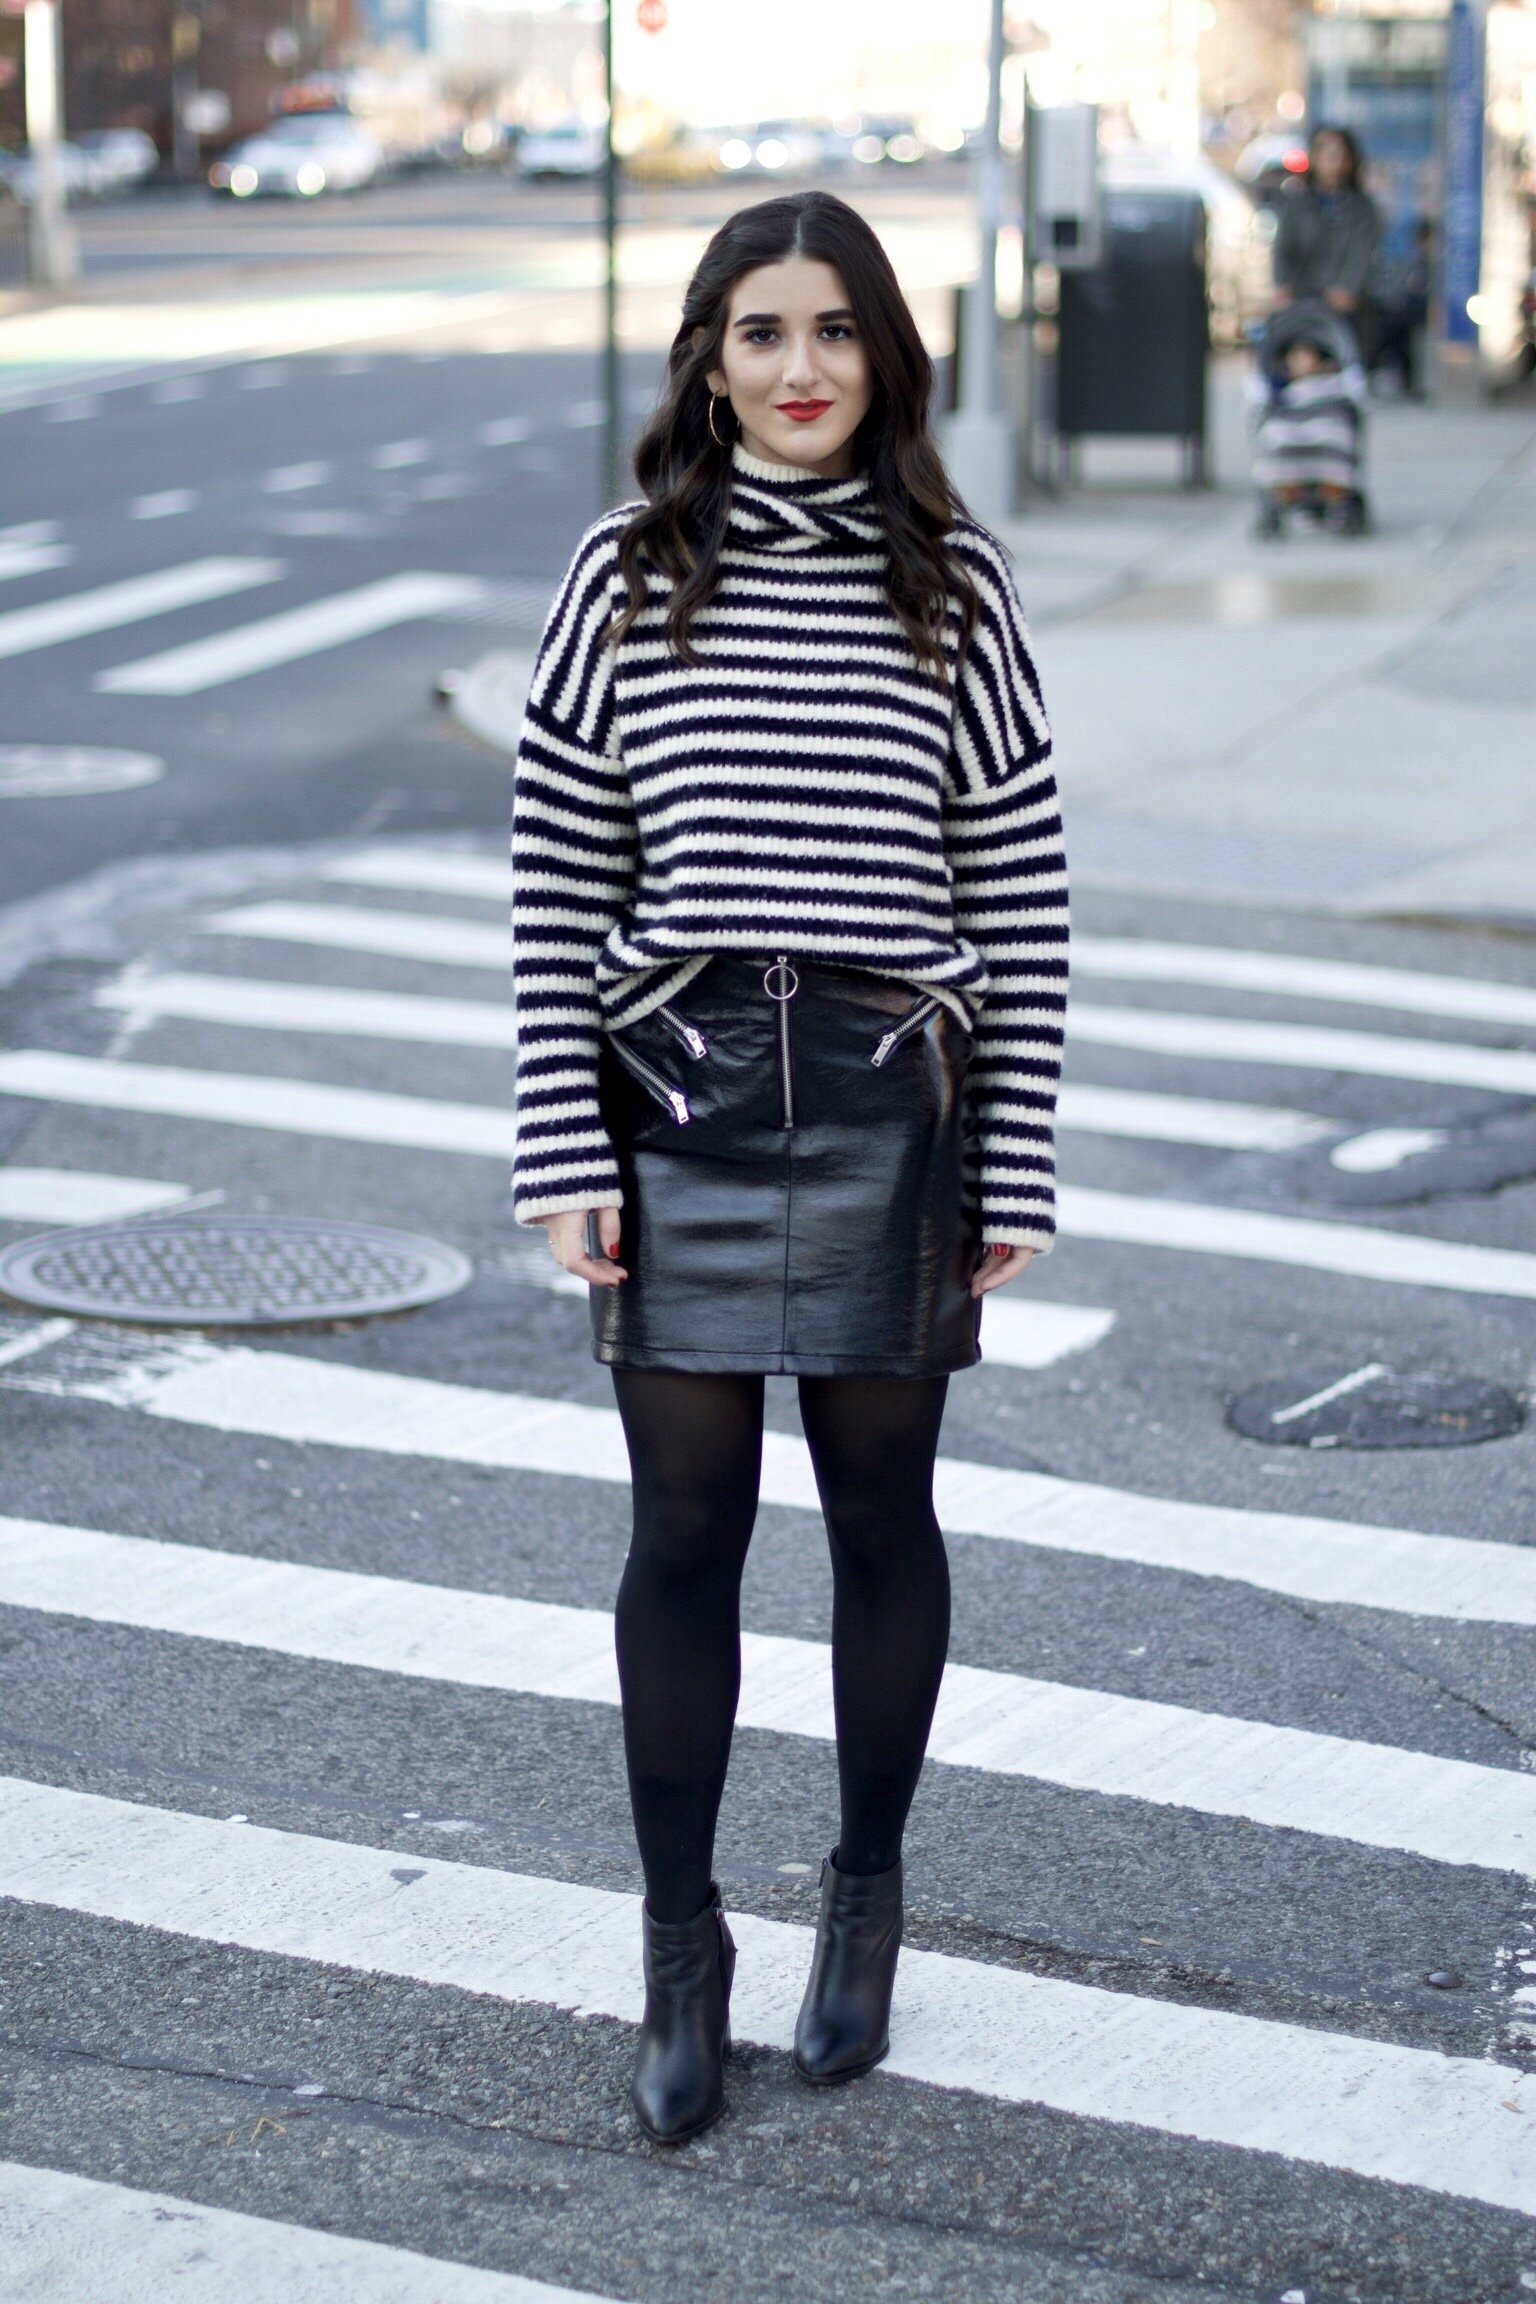 Striped Turtleneck Sweater + Pleather Skirt The Right Way To Ask Someone To Meet For Coffee Esther Santer Fashion Blog NYC Street Style Blogger Outfit OOTD Trendy Girl Women Black White Tights Ankle Booties Winter Hoops Earrings  Wavy Hair Shop Shoes.jpg